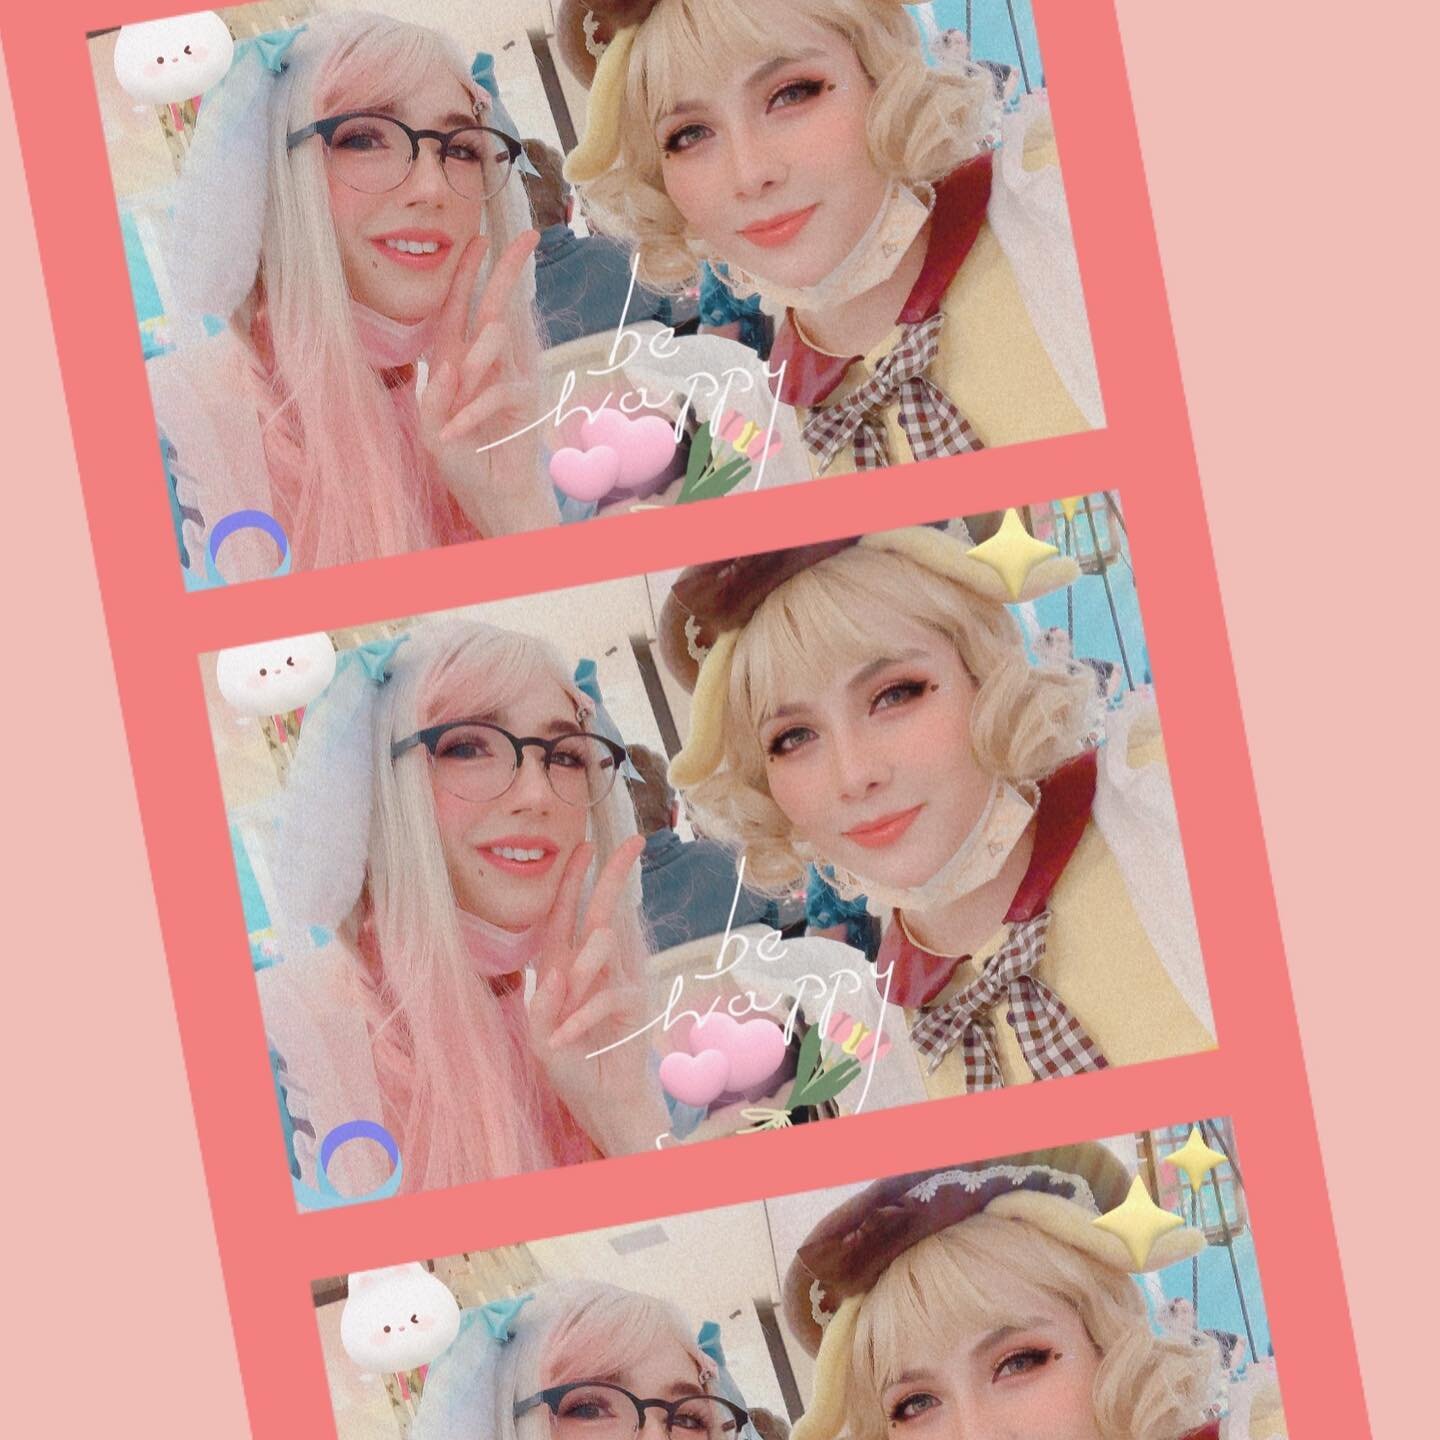 🐰 🍮 hello! We&rsquo;ve got some great news! 
We&rsquo;ve finally edited our session photos that others took with us, and we&rsquo;ll be posting them soon on our website!
ع˖⁺ ￼⋆ ୭ ￼.⋆｡⋆༶⋆˙⊹
We&rsquo;ll make sure to make an official post when we&rsqu